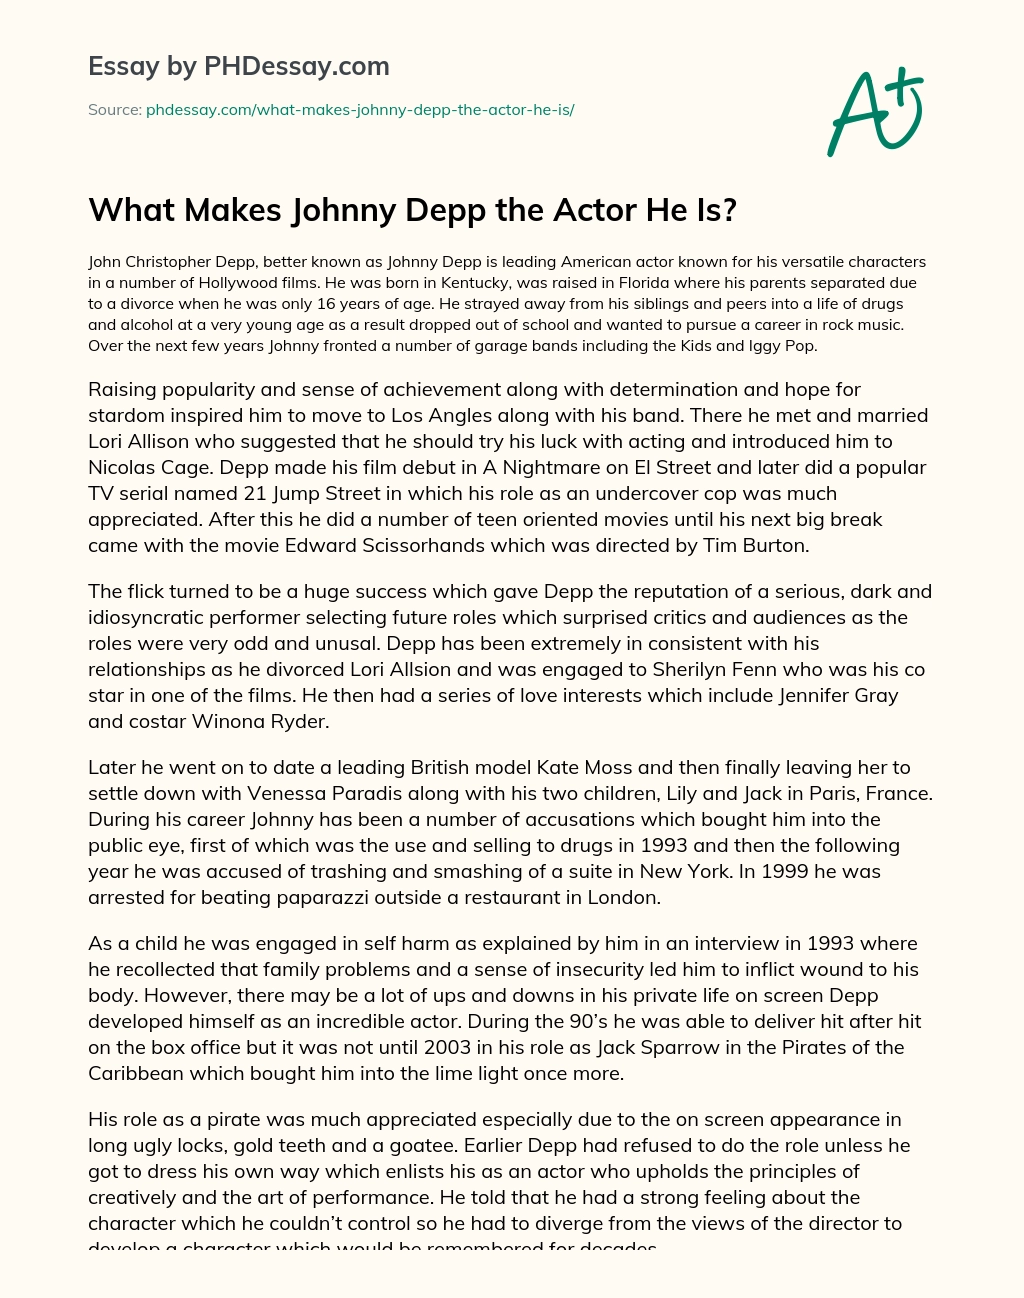 What Makes Johnny Depp the Actor He Is? essay